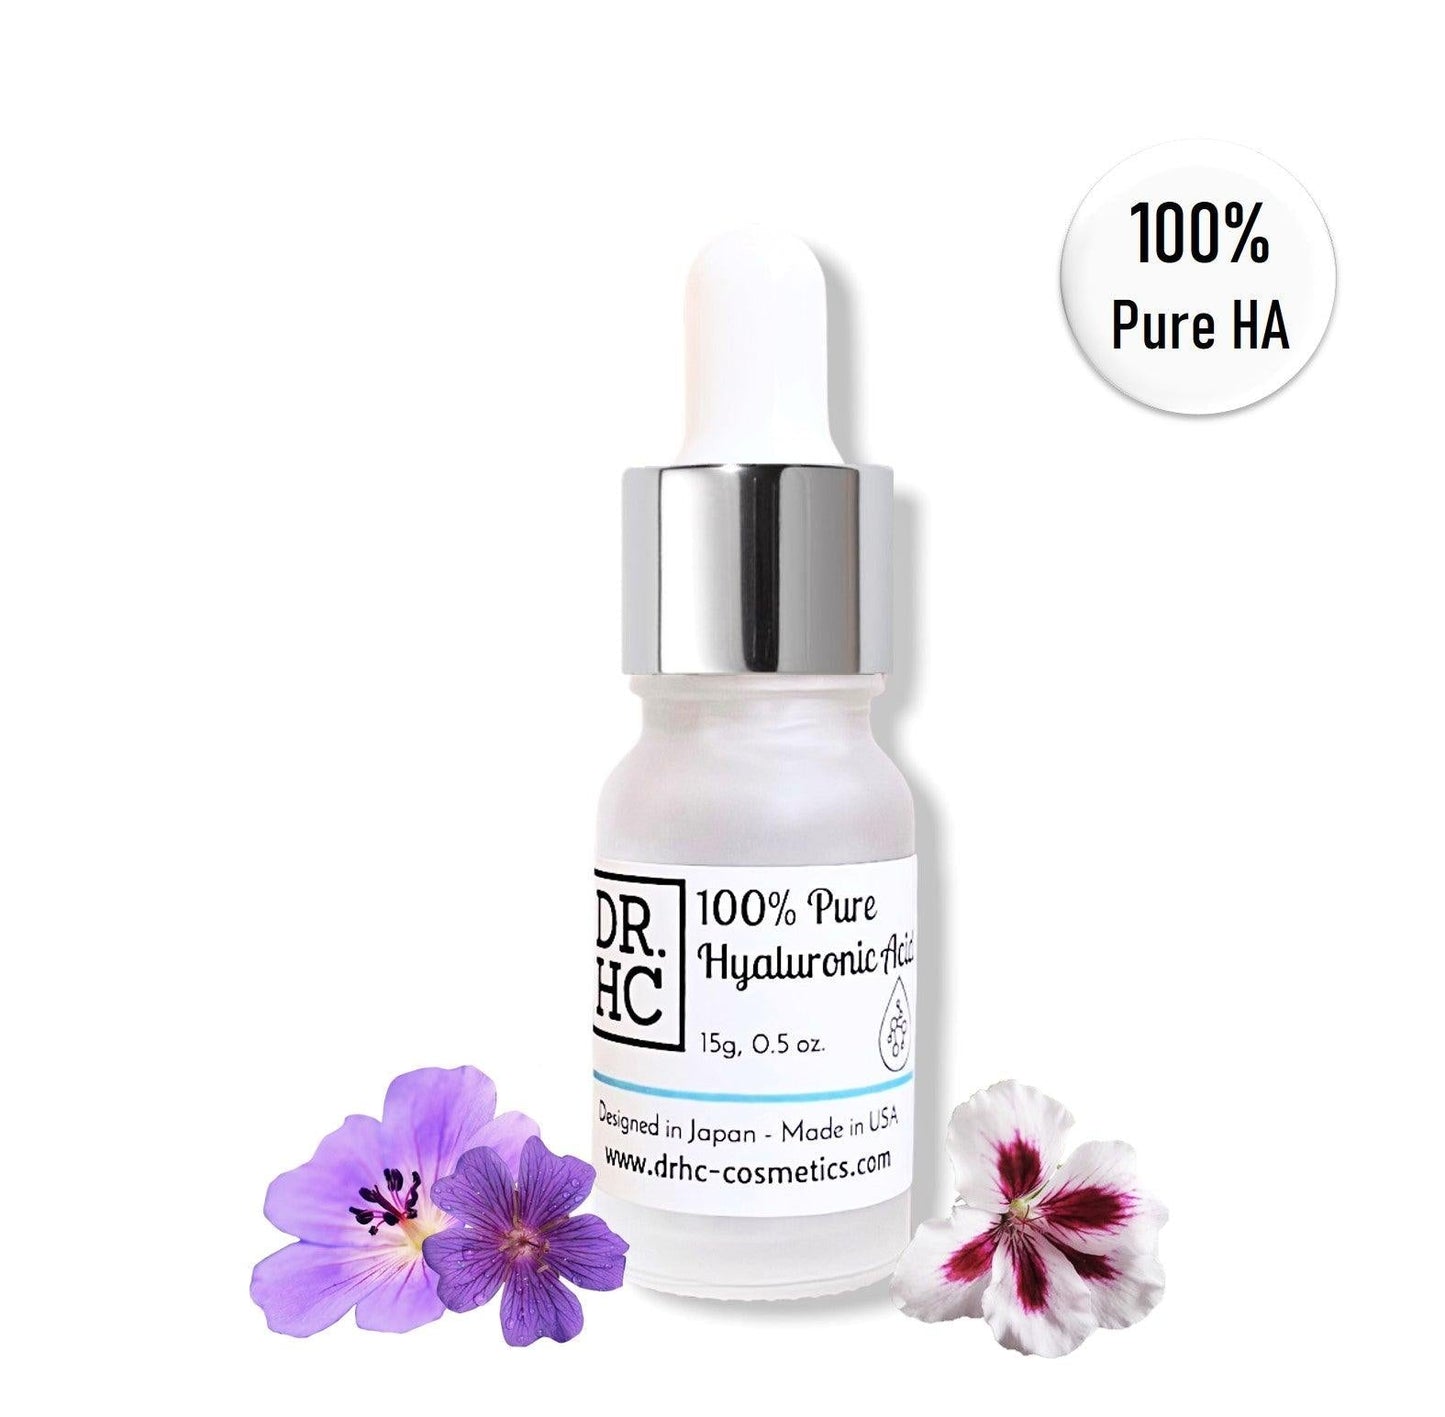 DR.HC 100% Pure Hyaluronic Acid (with 10% Hyaluronic Acid content) (15g, 0.5oz.) (Hydrating, Skin firming, Skin toning, Anti-acne...)